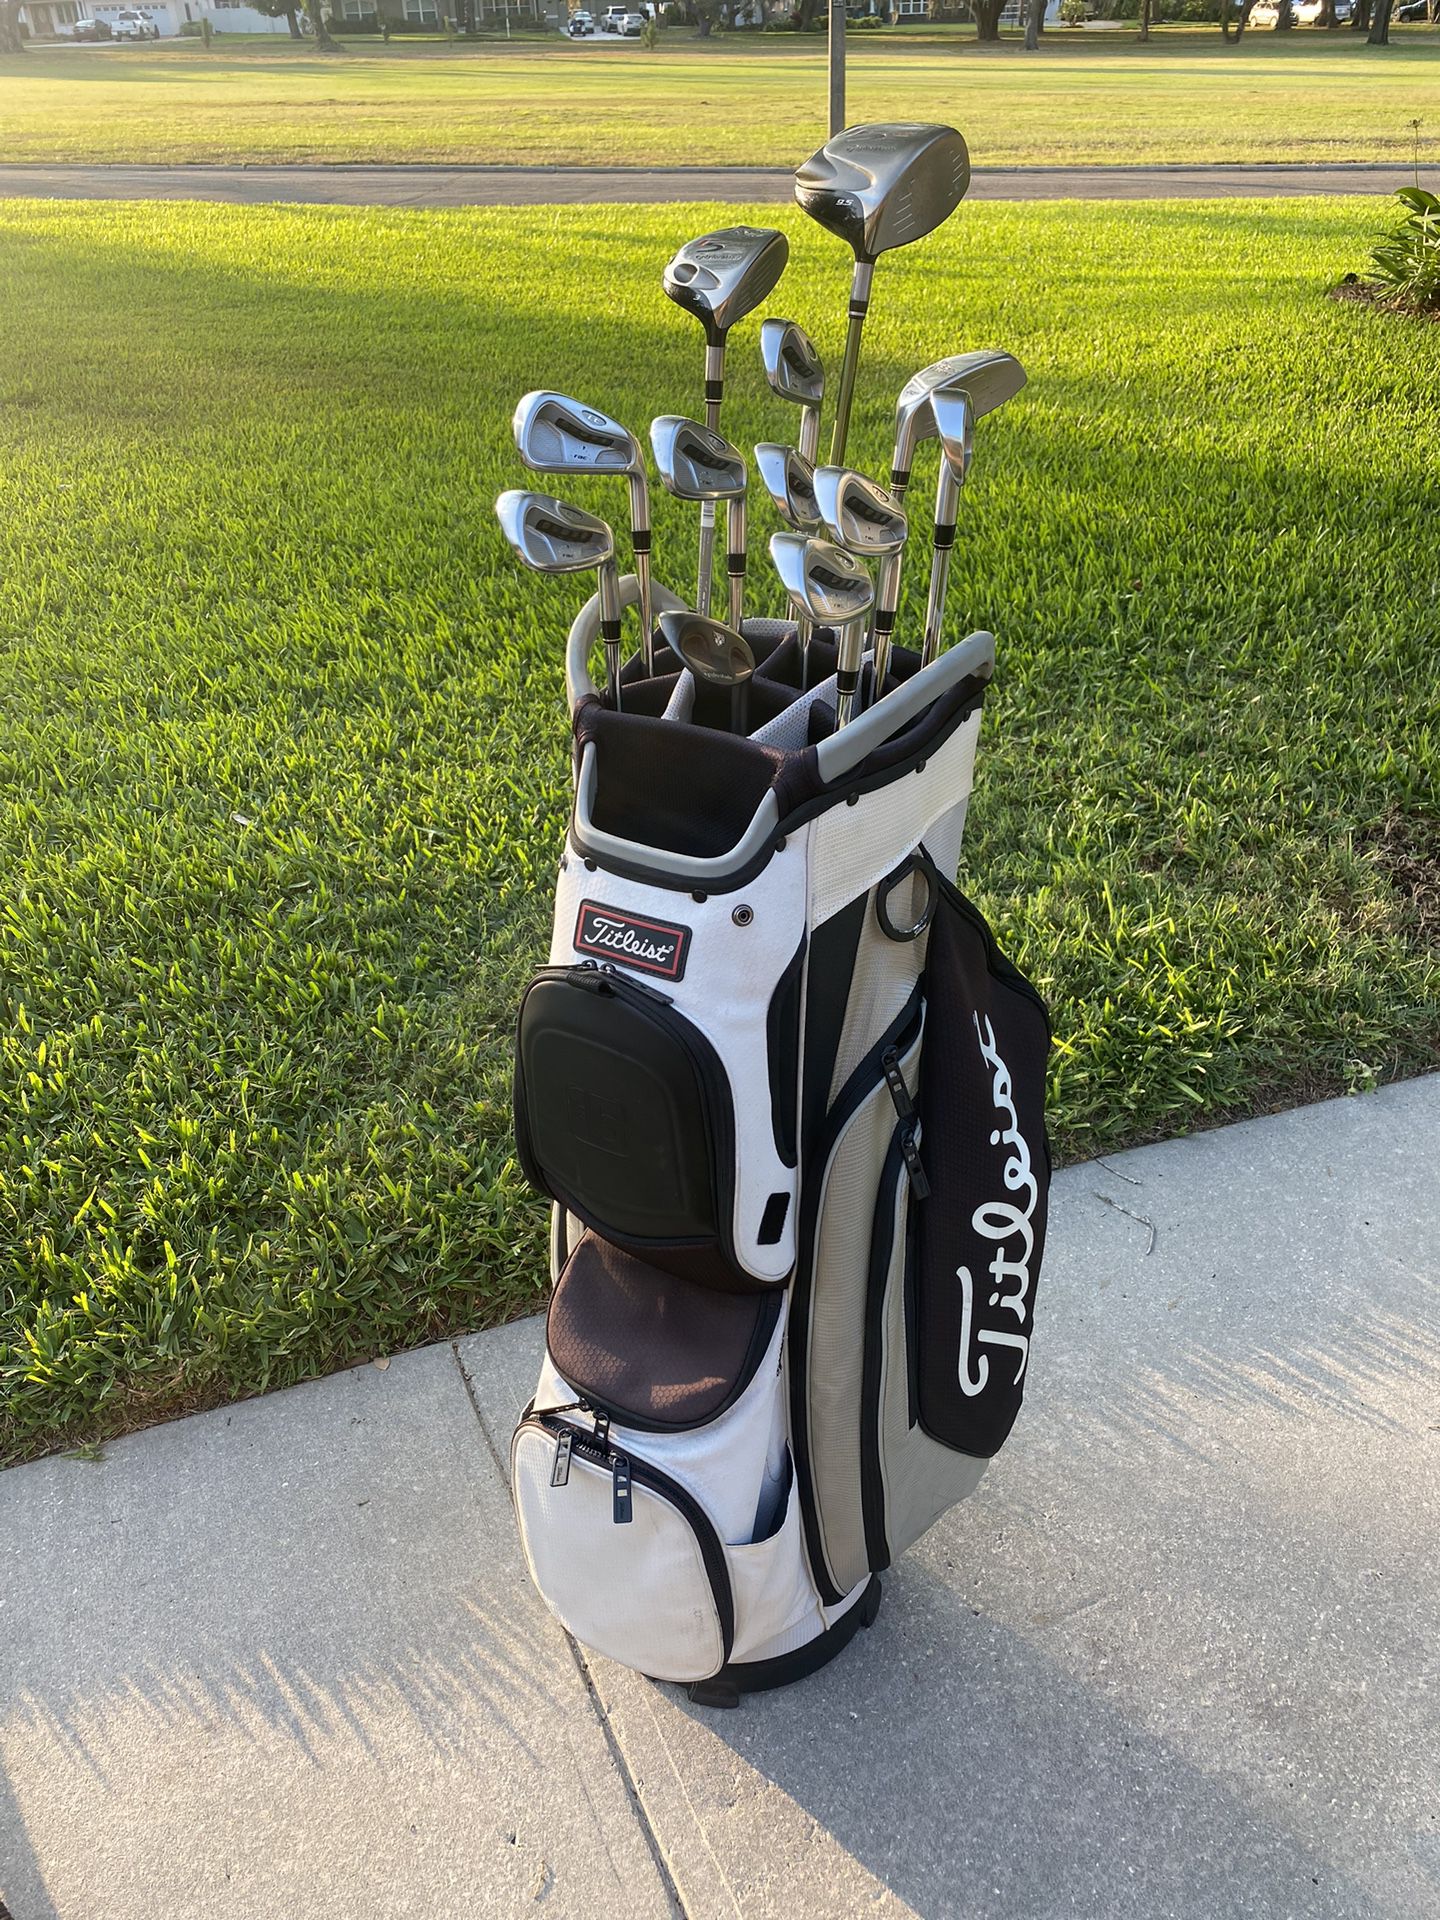 Taylormade Golf Set Bag Included